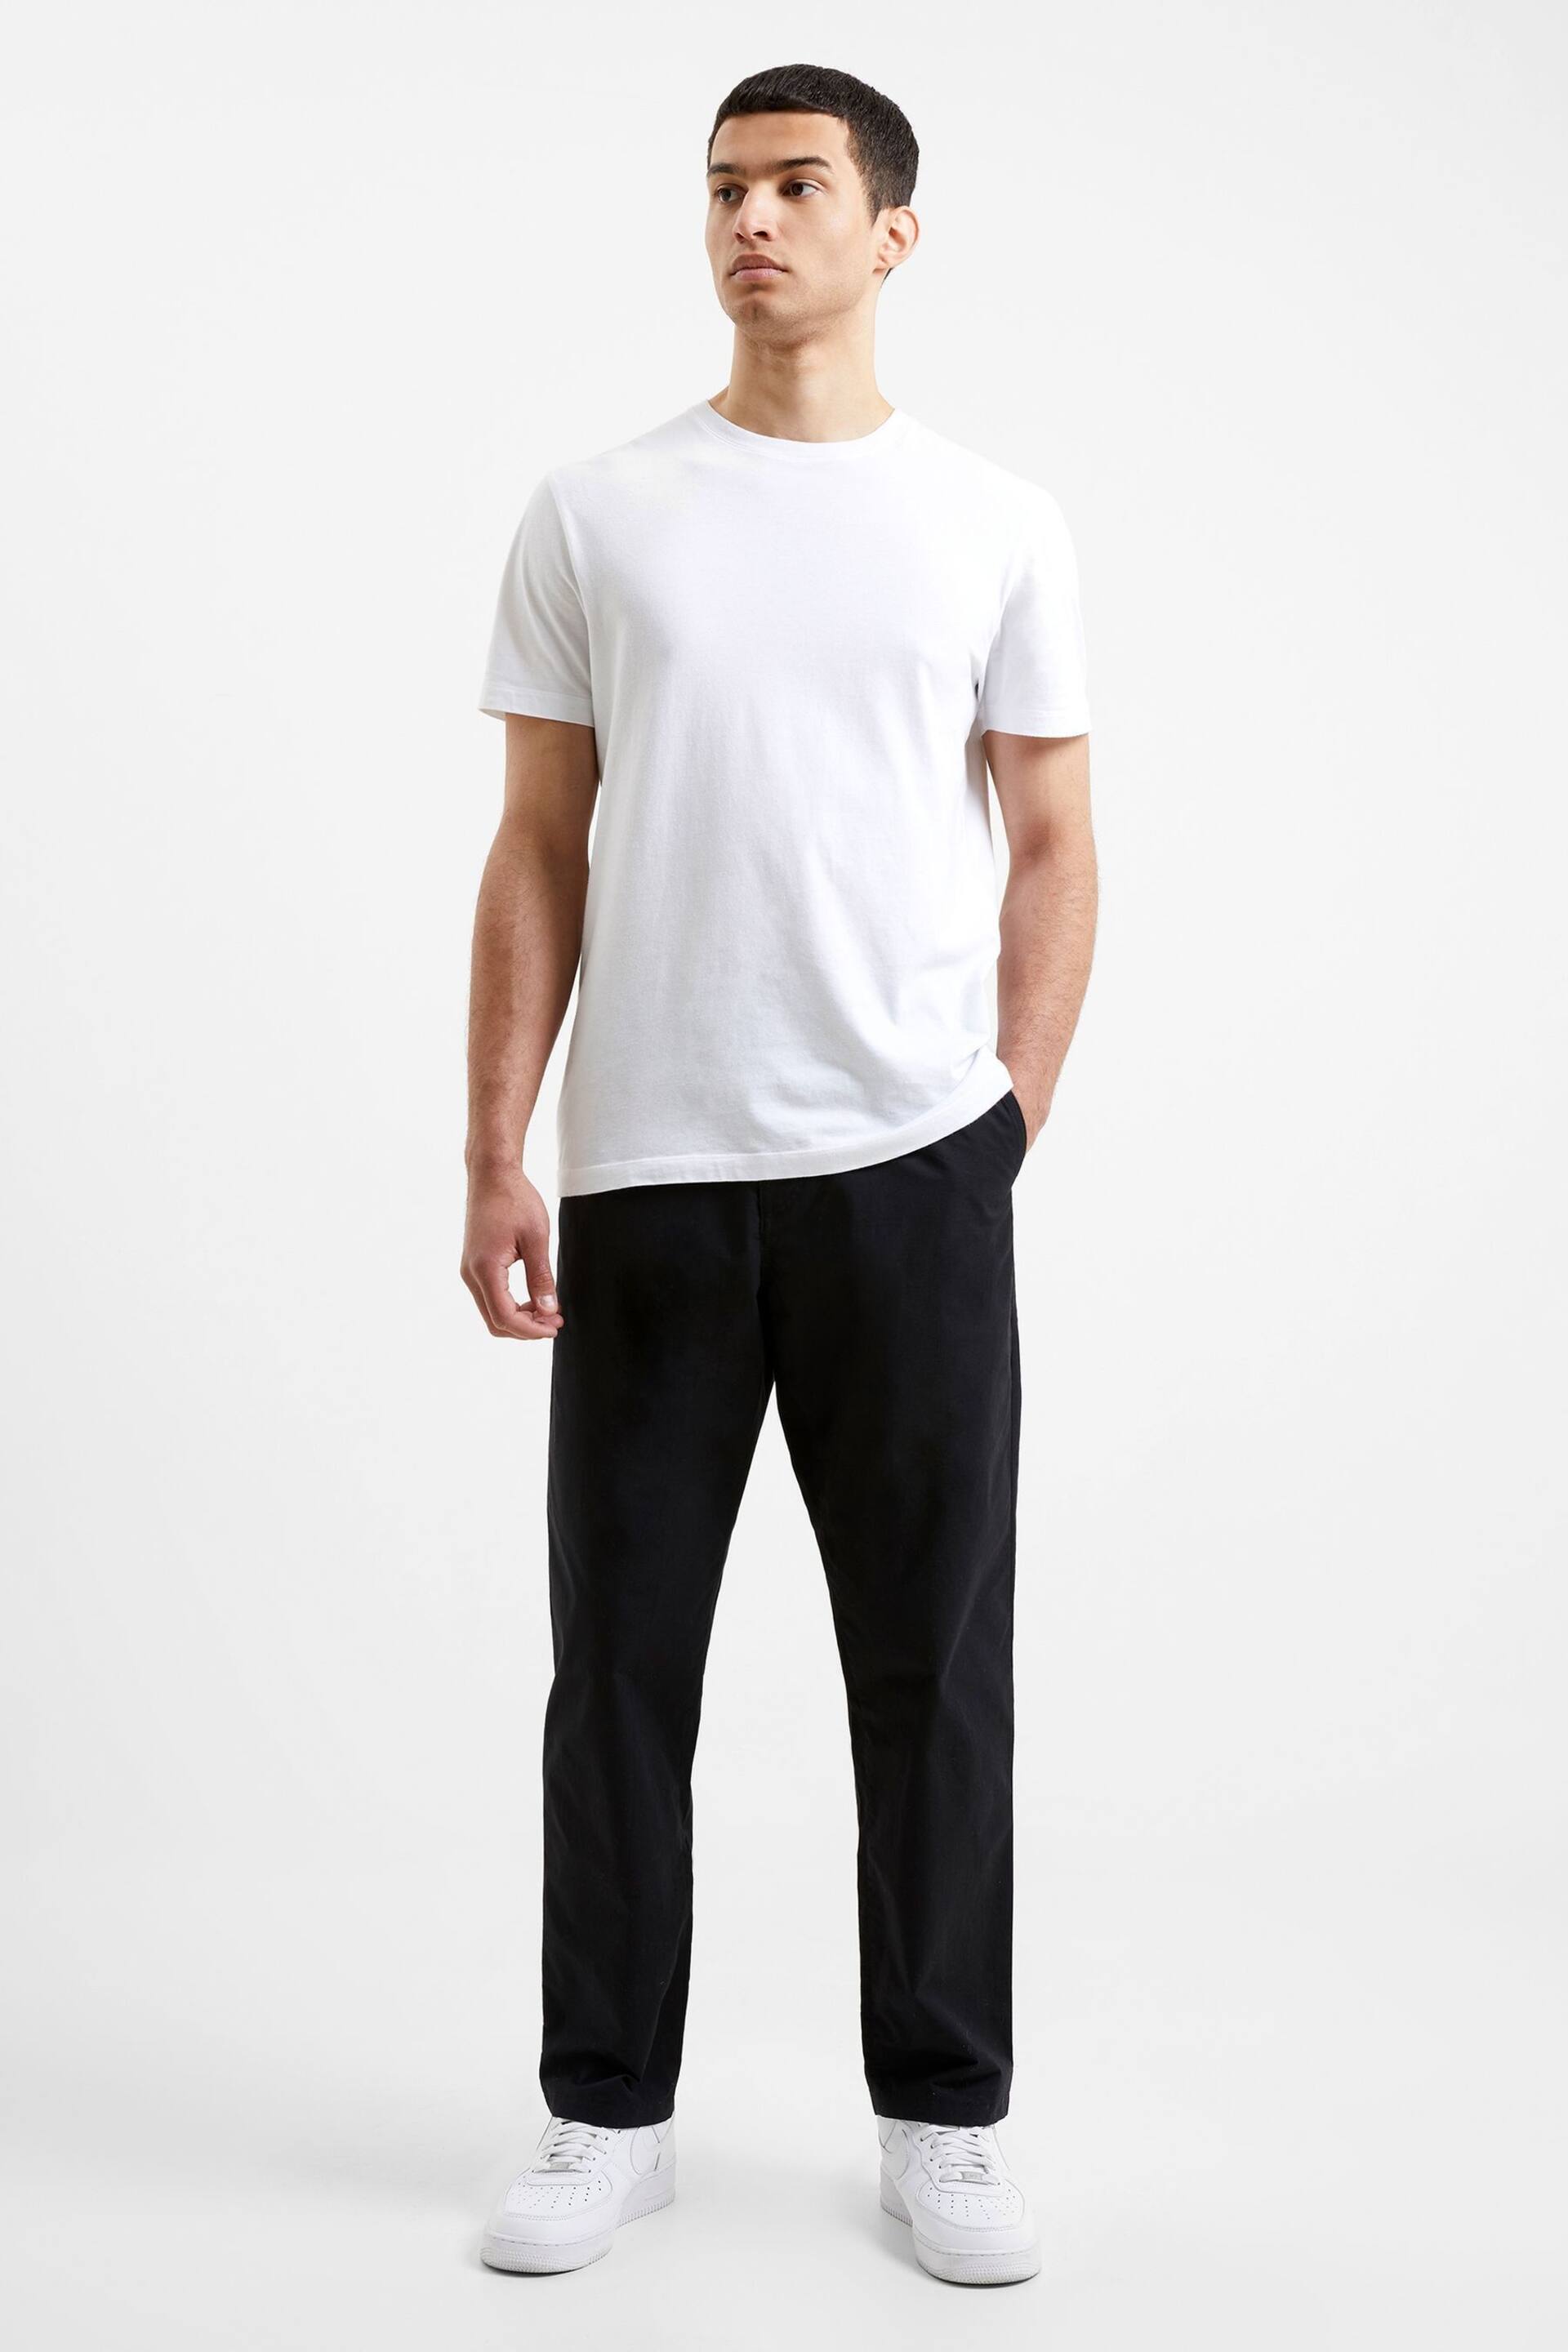 French Connection Military Cotton Tappered Chino Trousers - Image 3 of 3